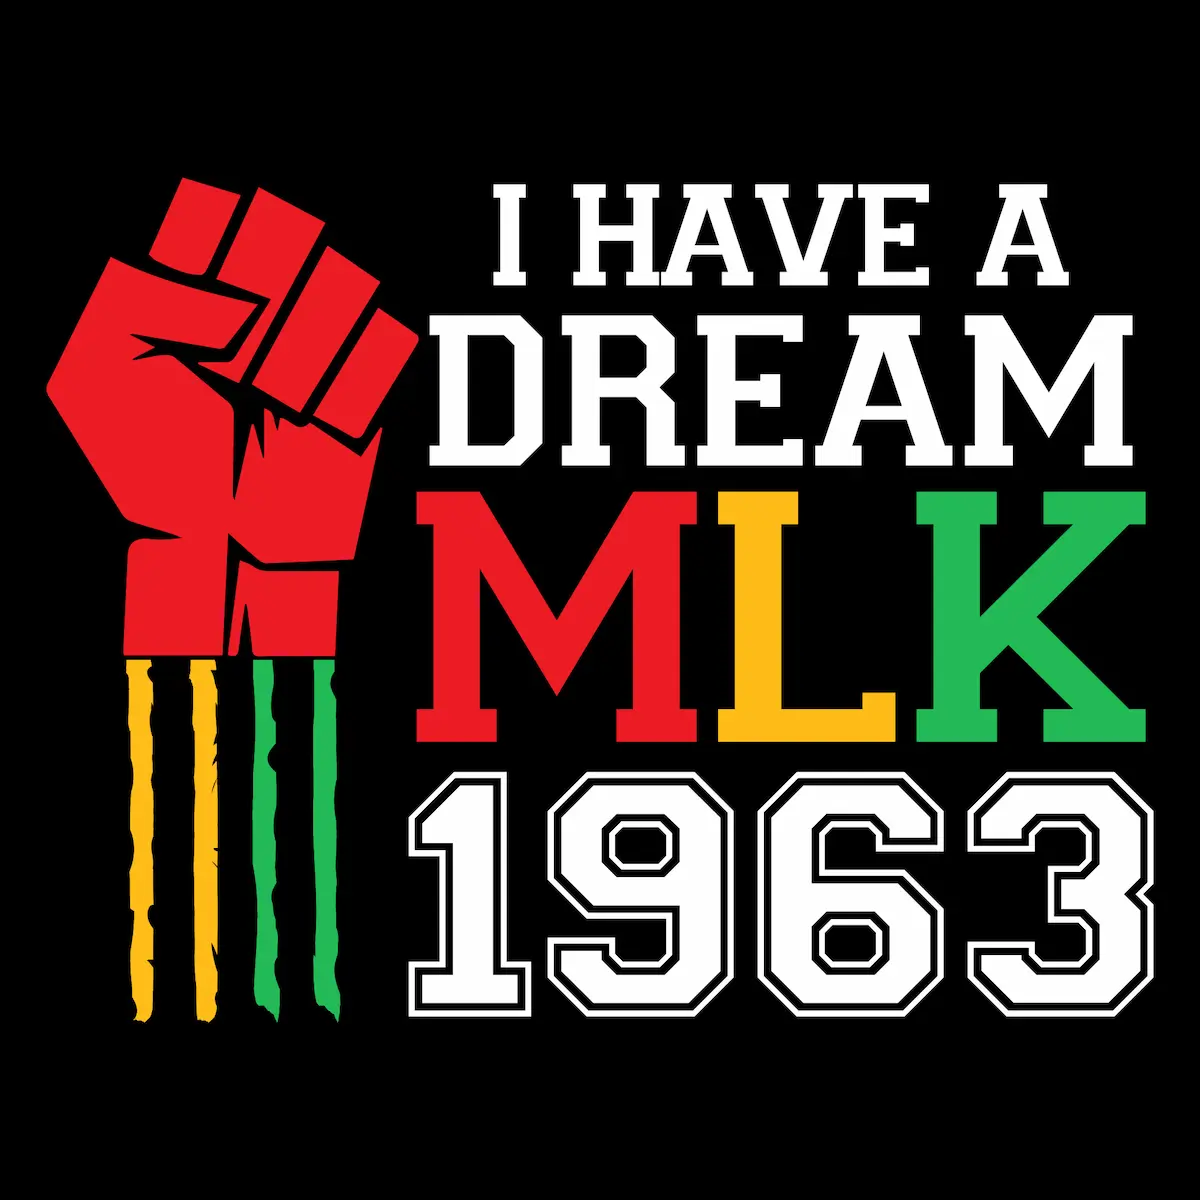 I Have a Dream MLK 1963